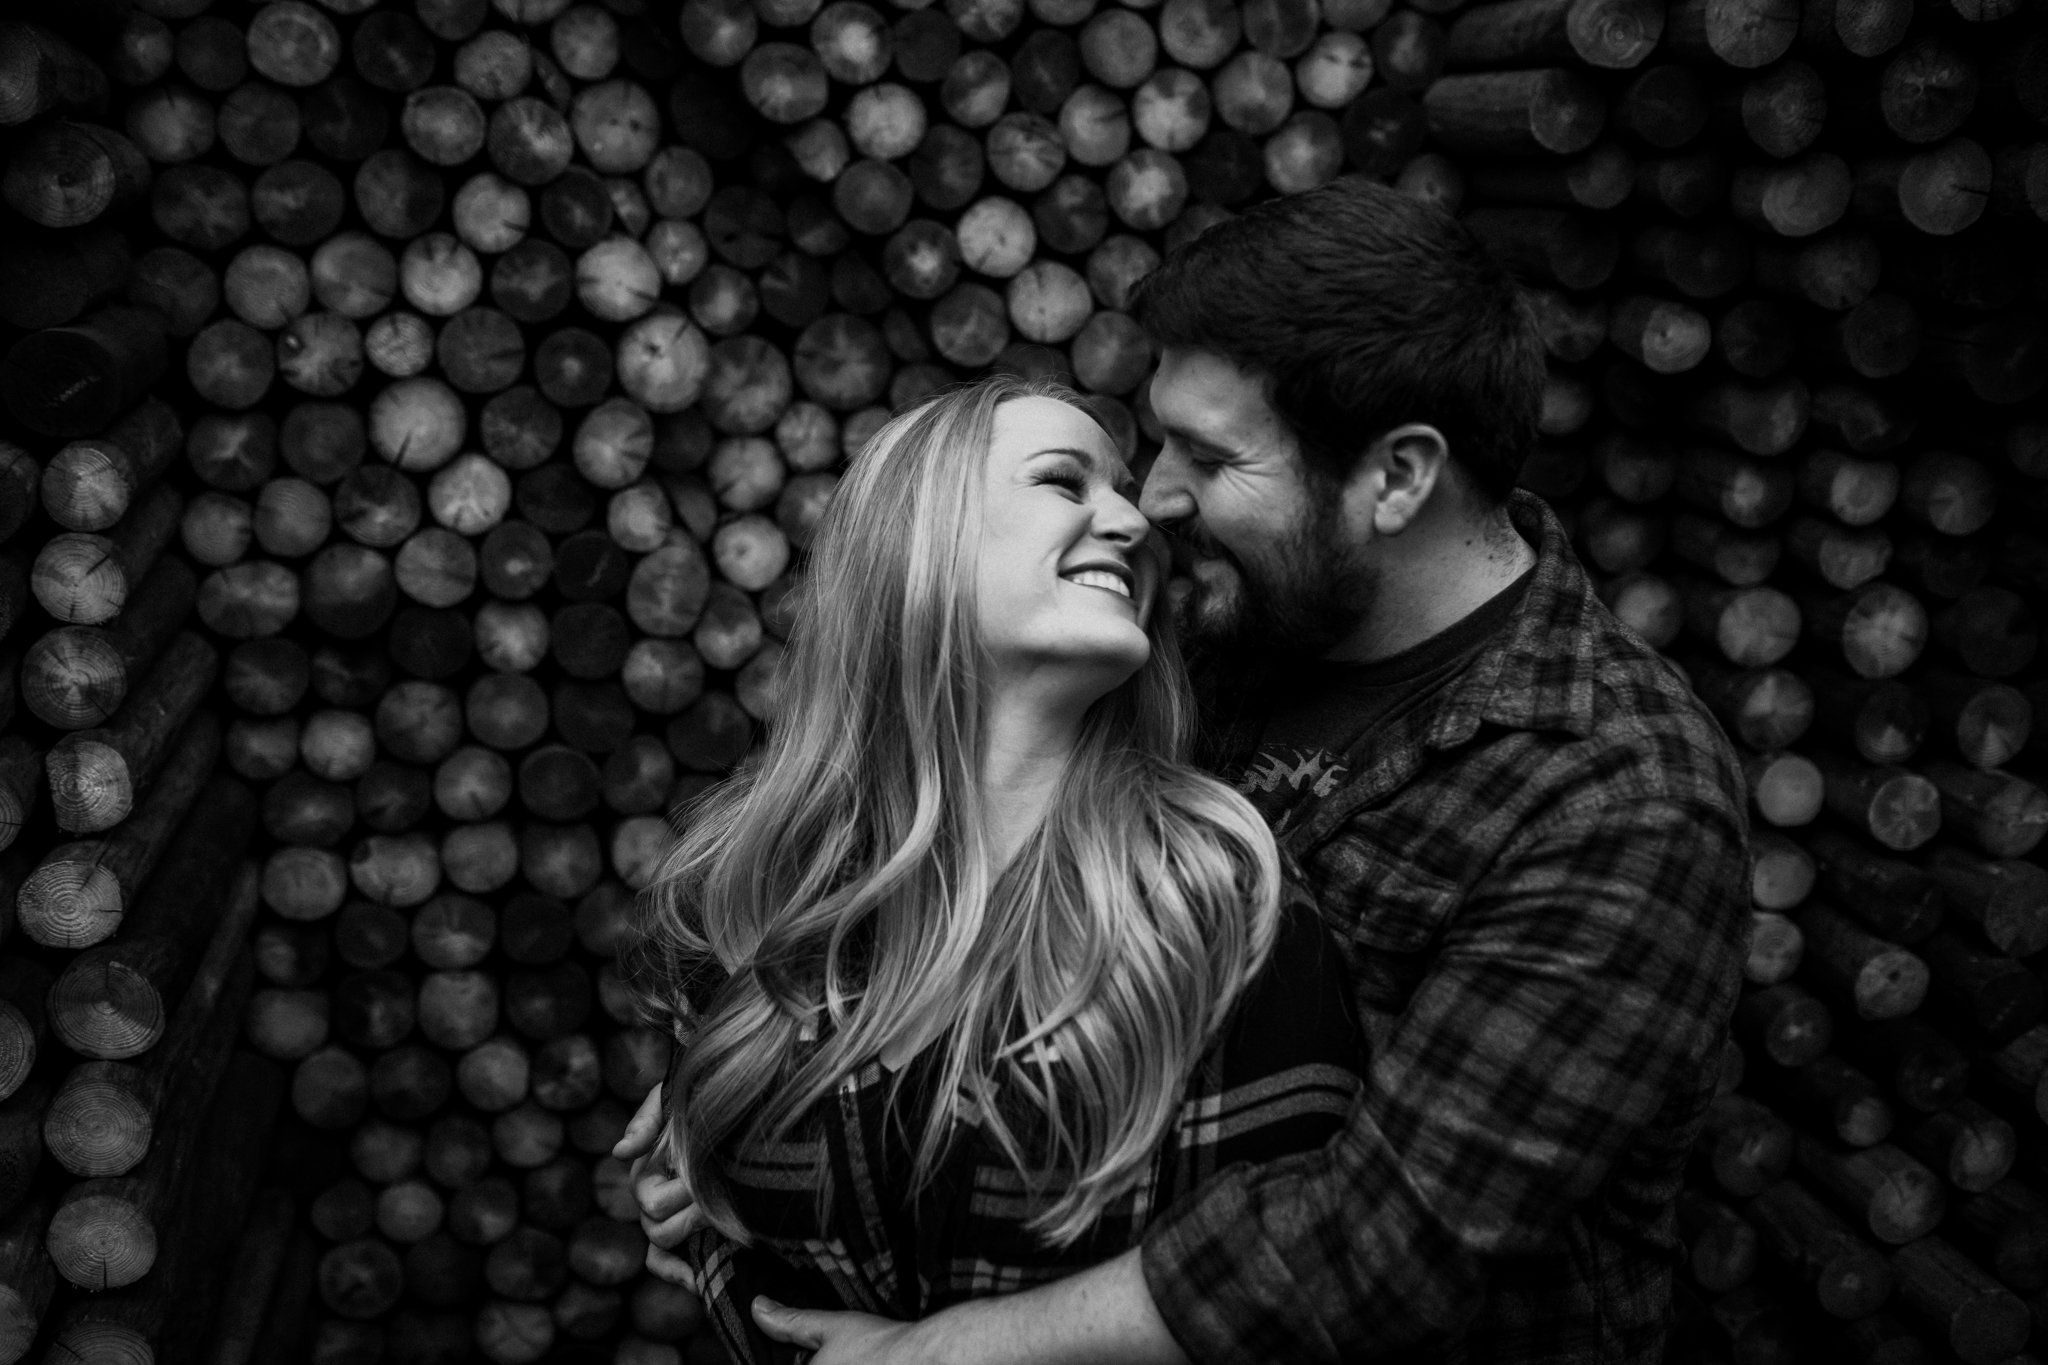 wiseacre-brewing-wedding-photographer-the-warmth-around-you-cassie-cook-photography (25 of 64).jpg